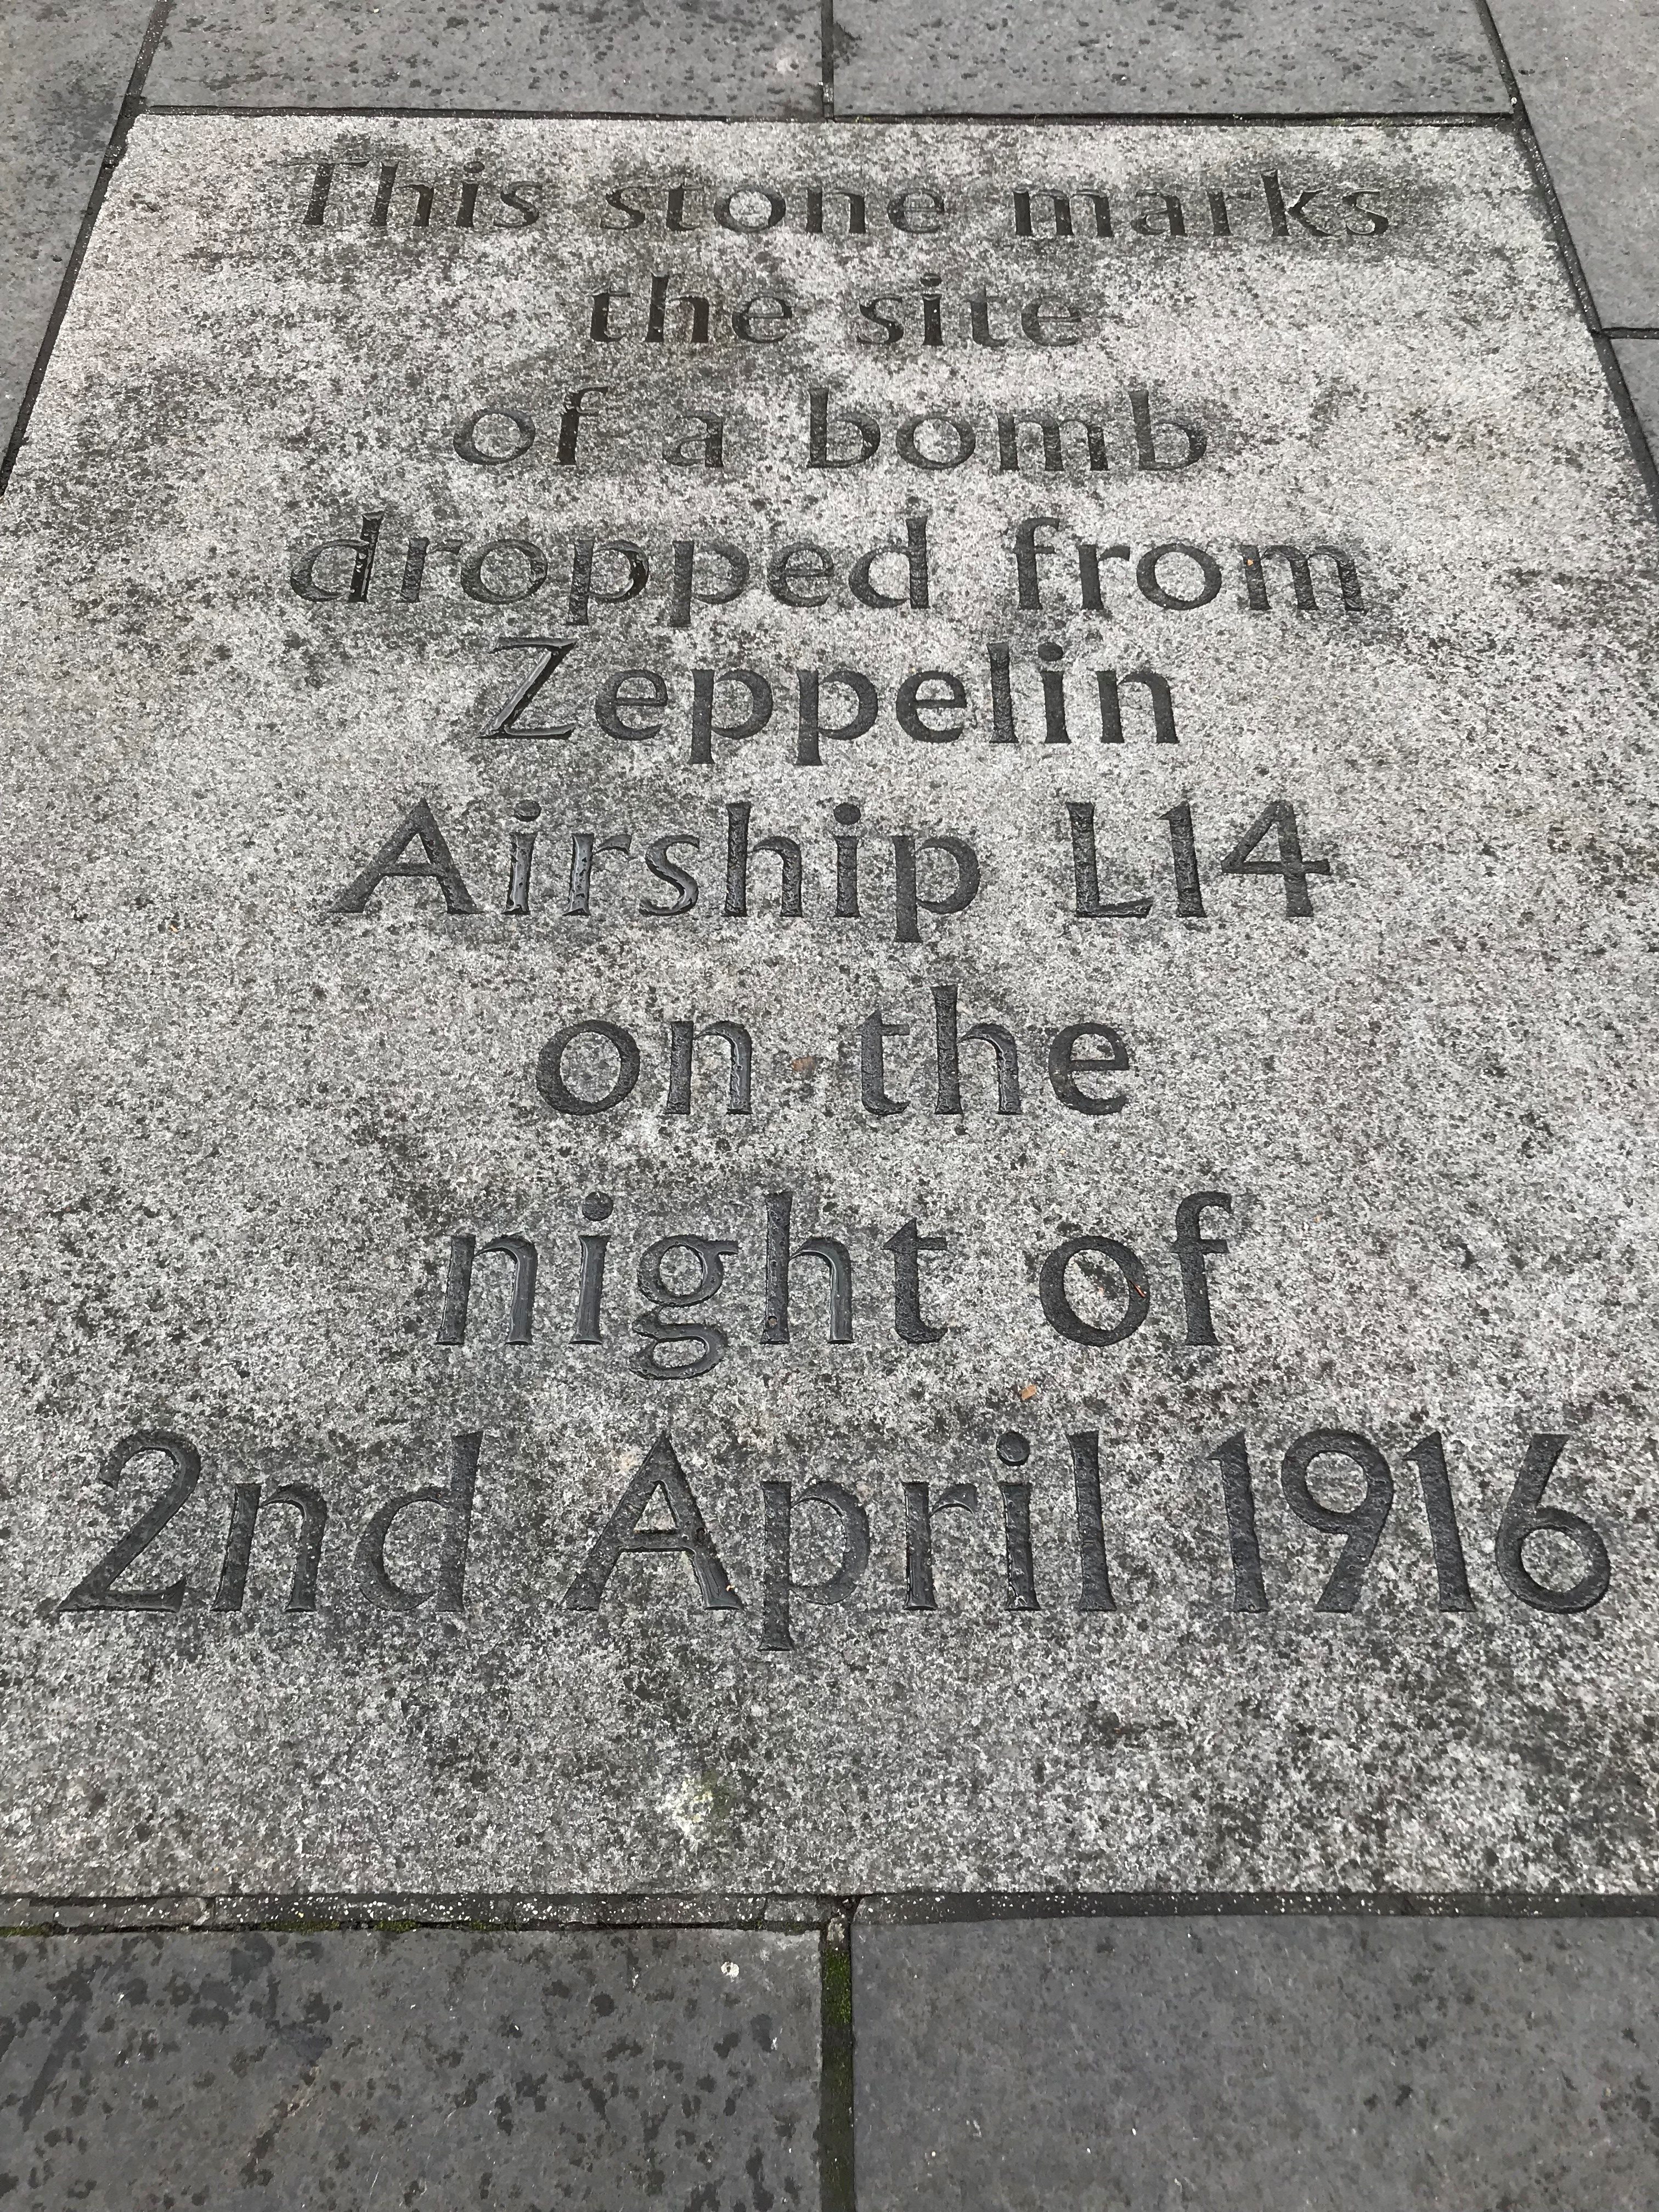 A flagstone marking the spot where a bomb dropped in the Grassmarket